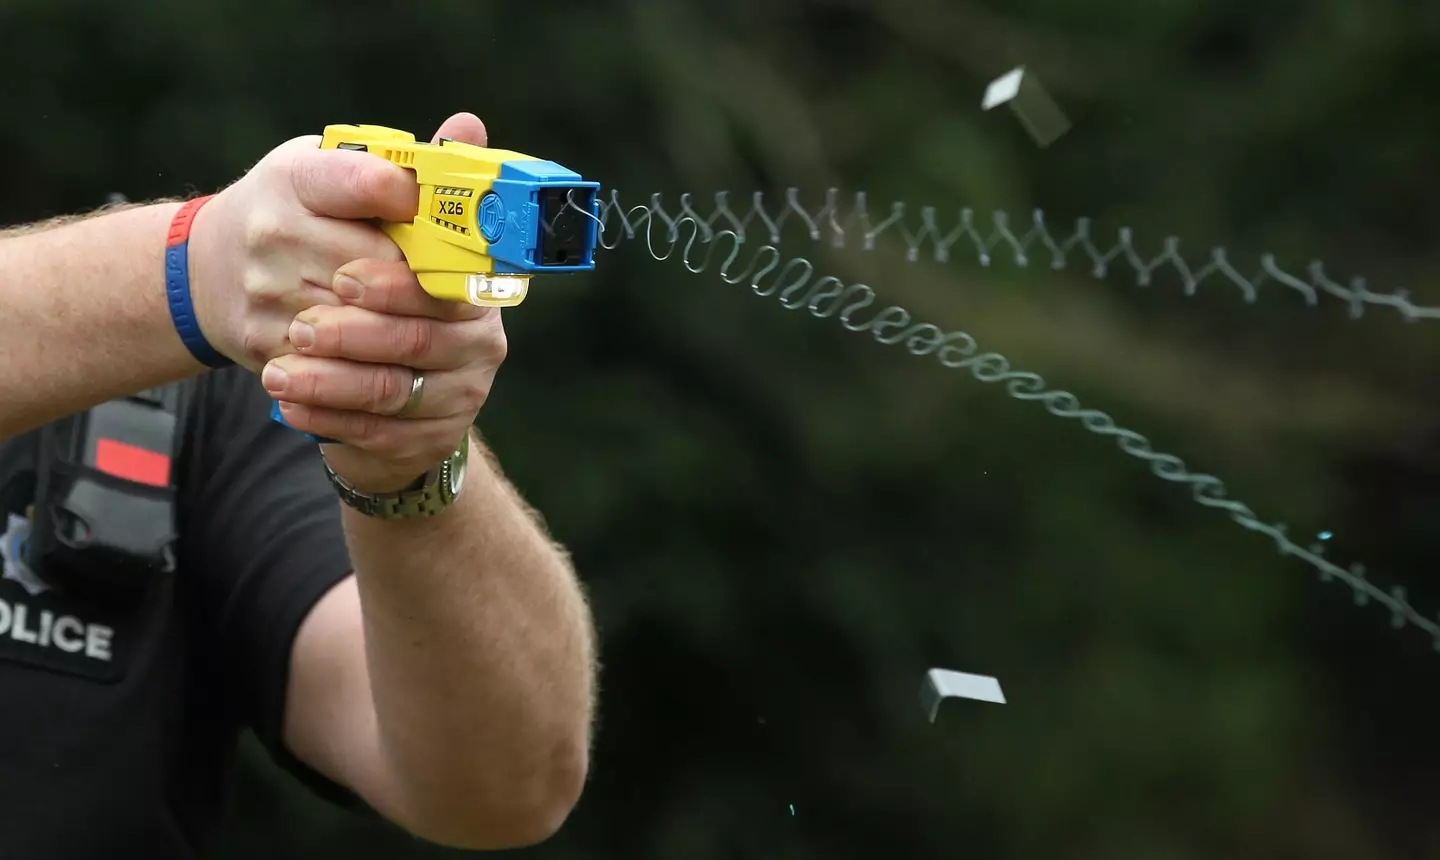 Stock image of a taser being discharged.